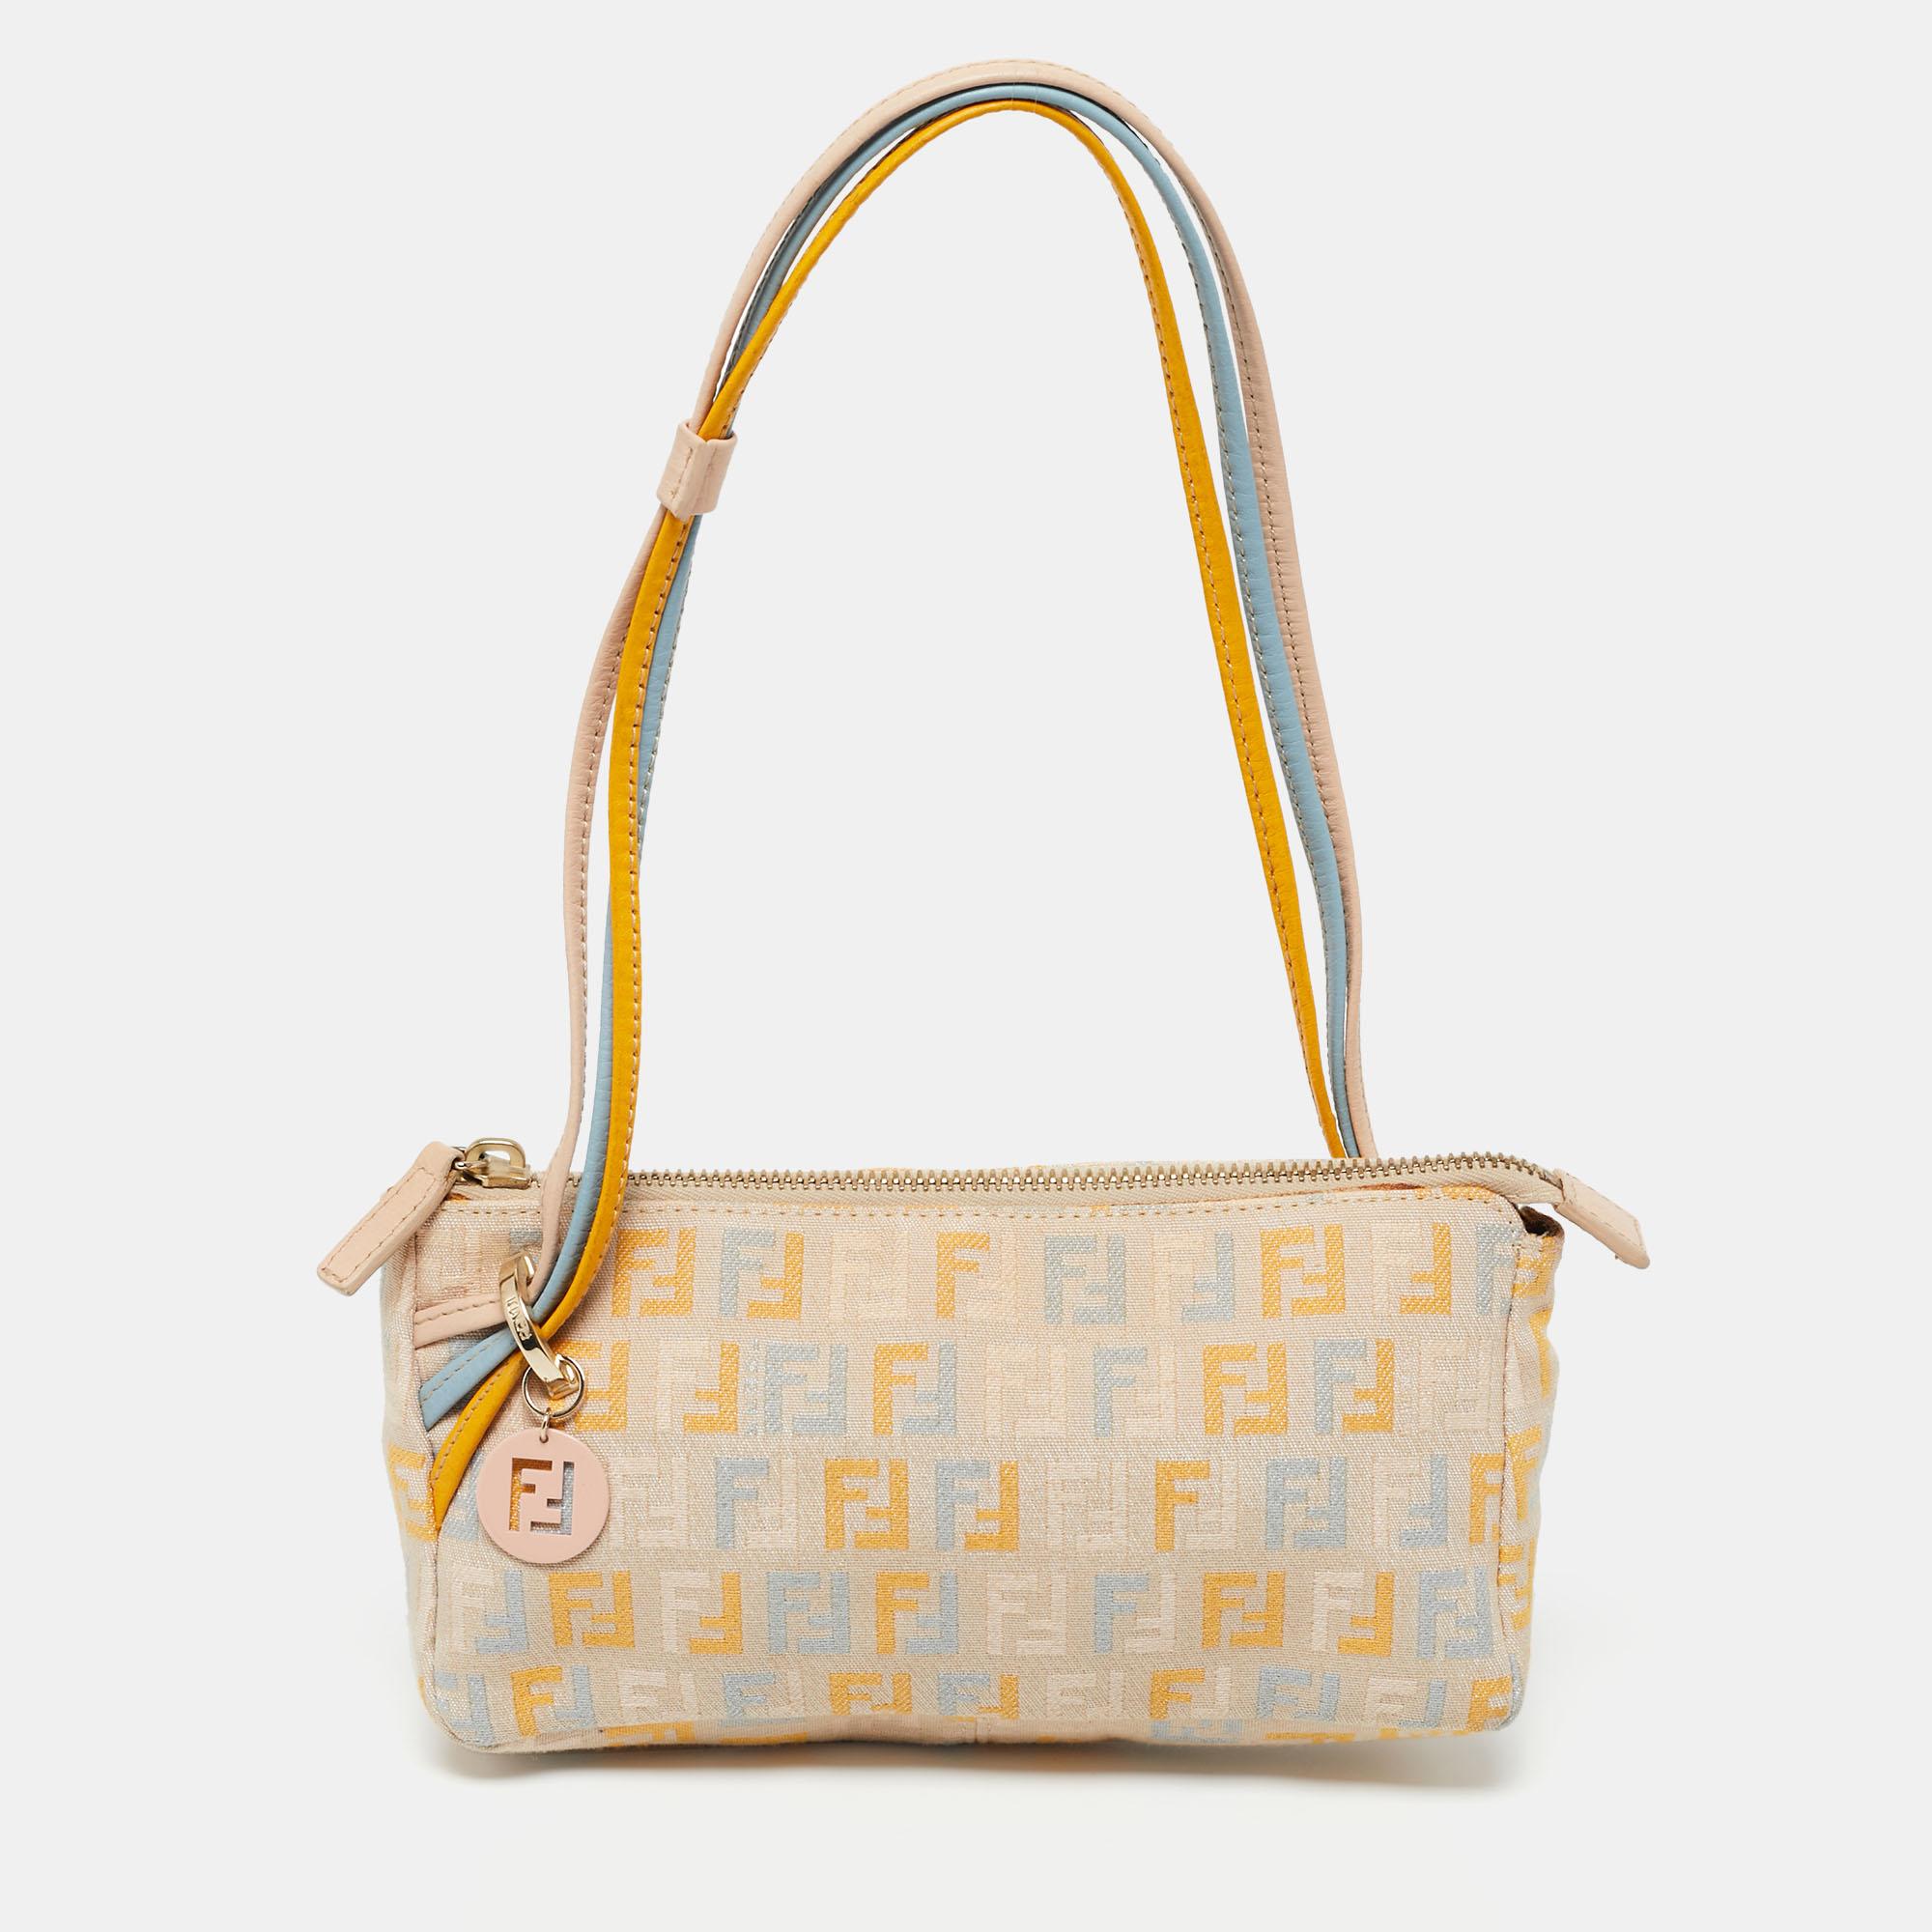 Make a chic style statement with this baguette from the House of Fendi. It has been designed using multicolored Zucchino canvas and leather on the exterior. It is supported by a single sturdy handle and is adorned with gold-tone hardware. Carry this